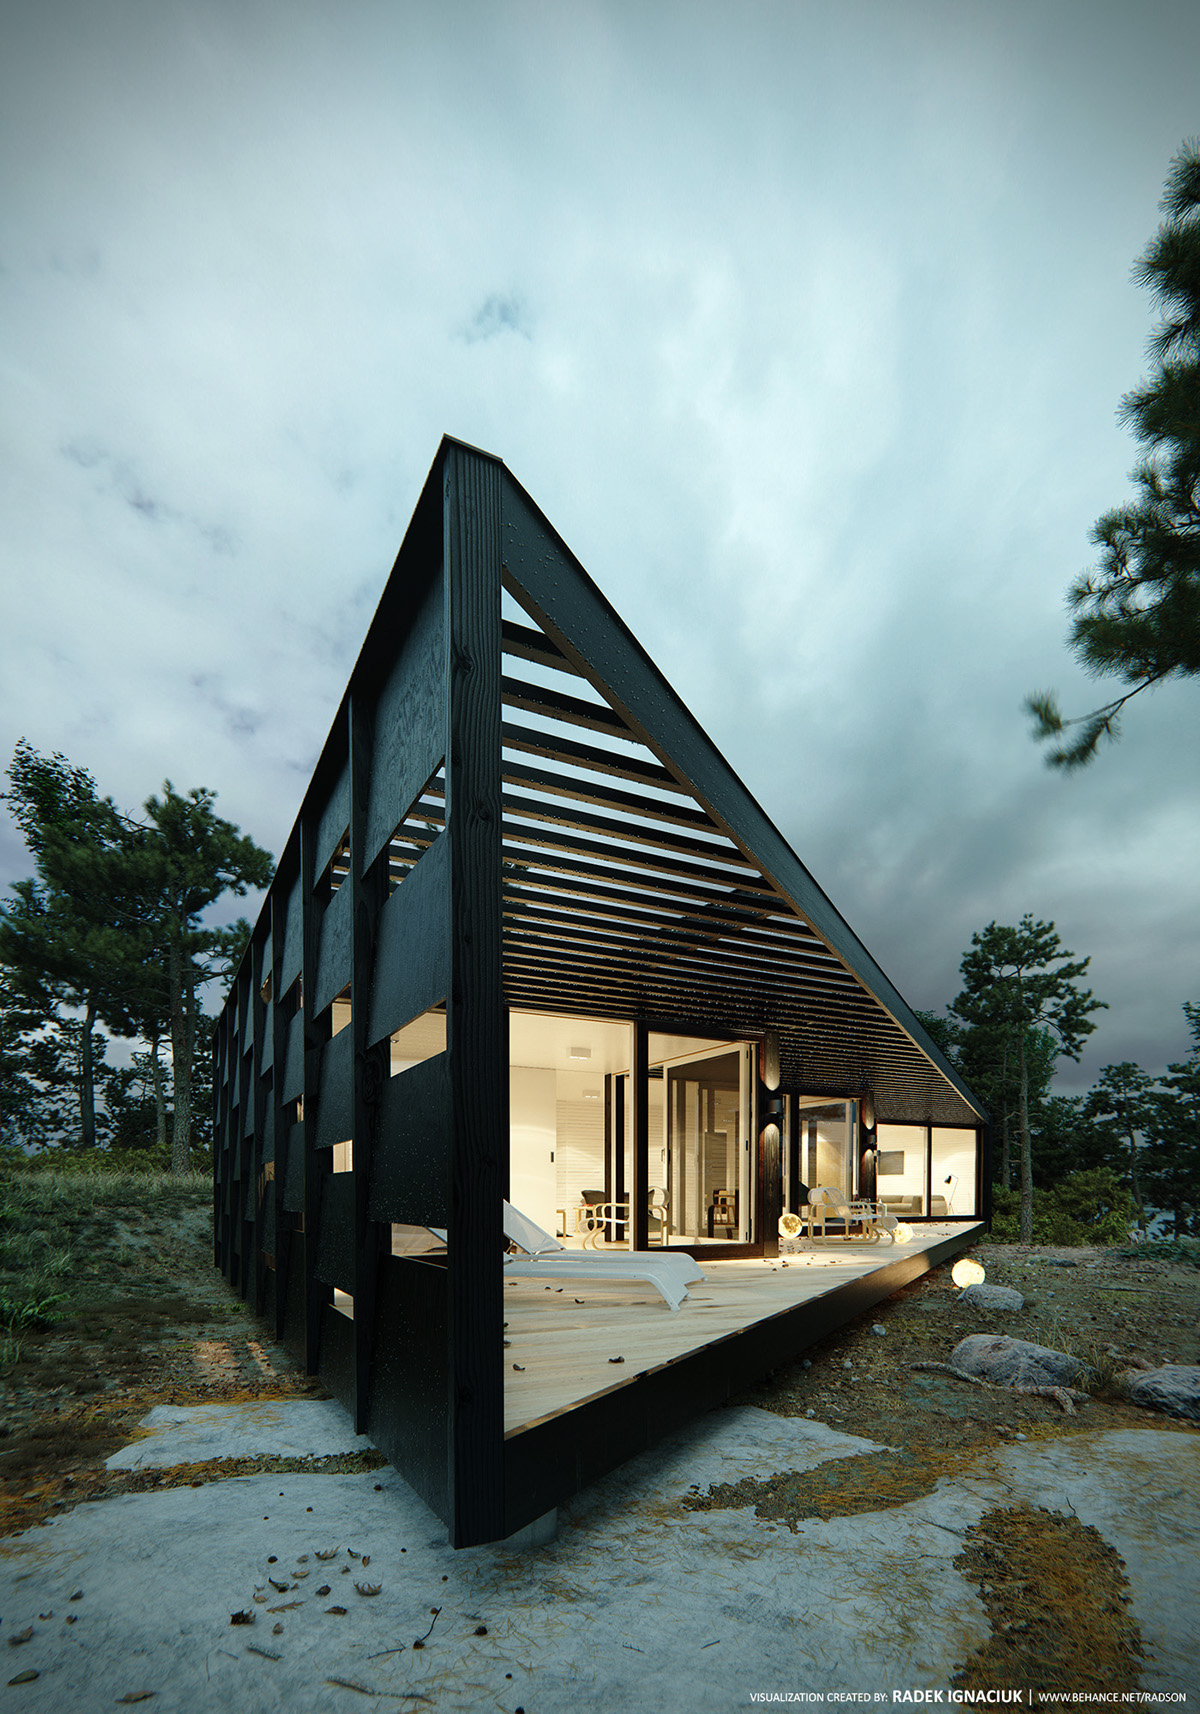 3ds max vray visualization house wooden archipelago Sweden forest lake cabin